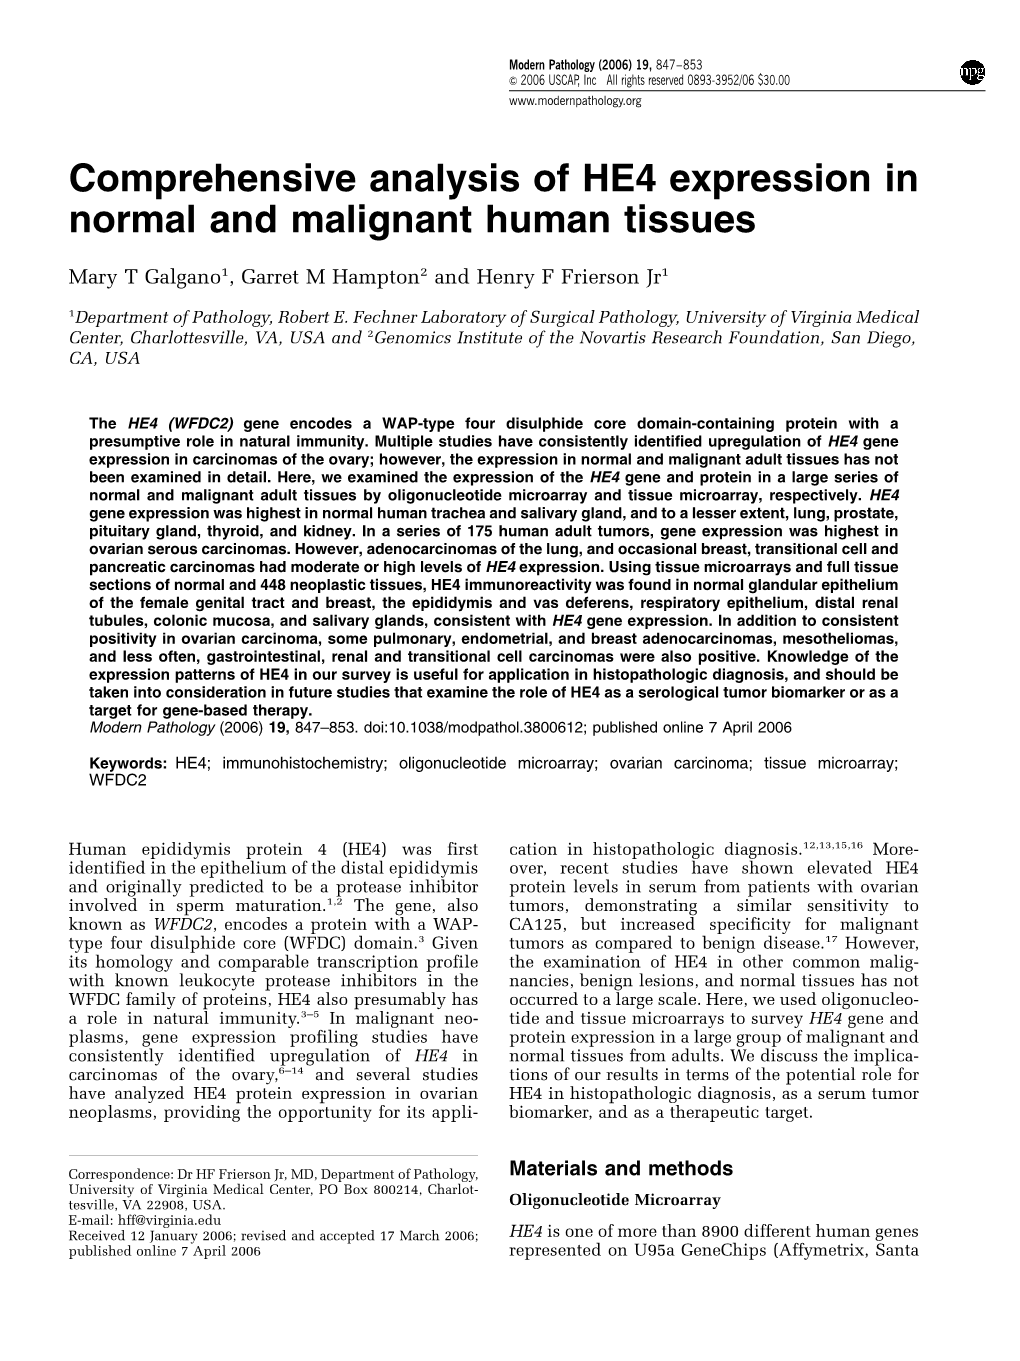 Comprehensive Analysis of HE4 Expression in Normal and Malignant Human Tissues